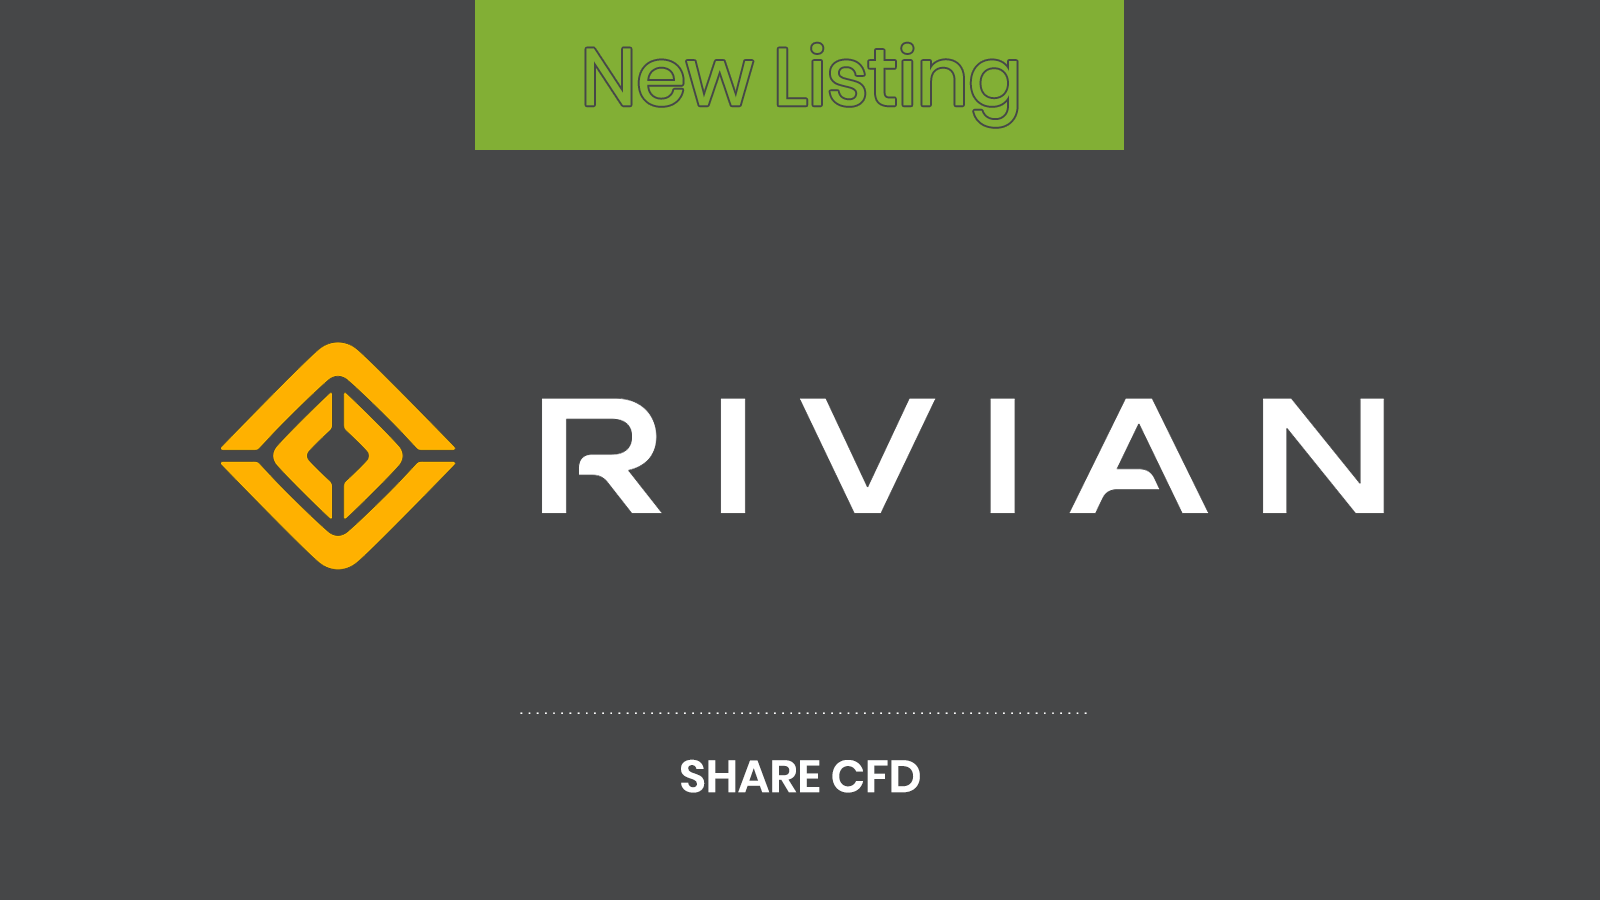 New Listing: Rivian Automotive Share CFD is now available to trade on ThinkMarkets